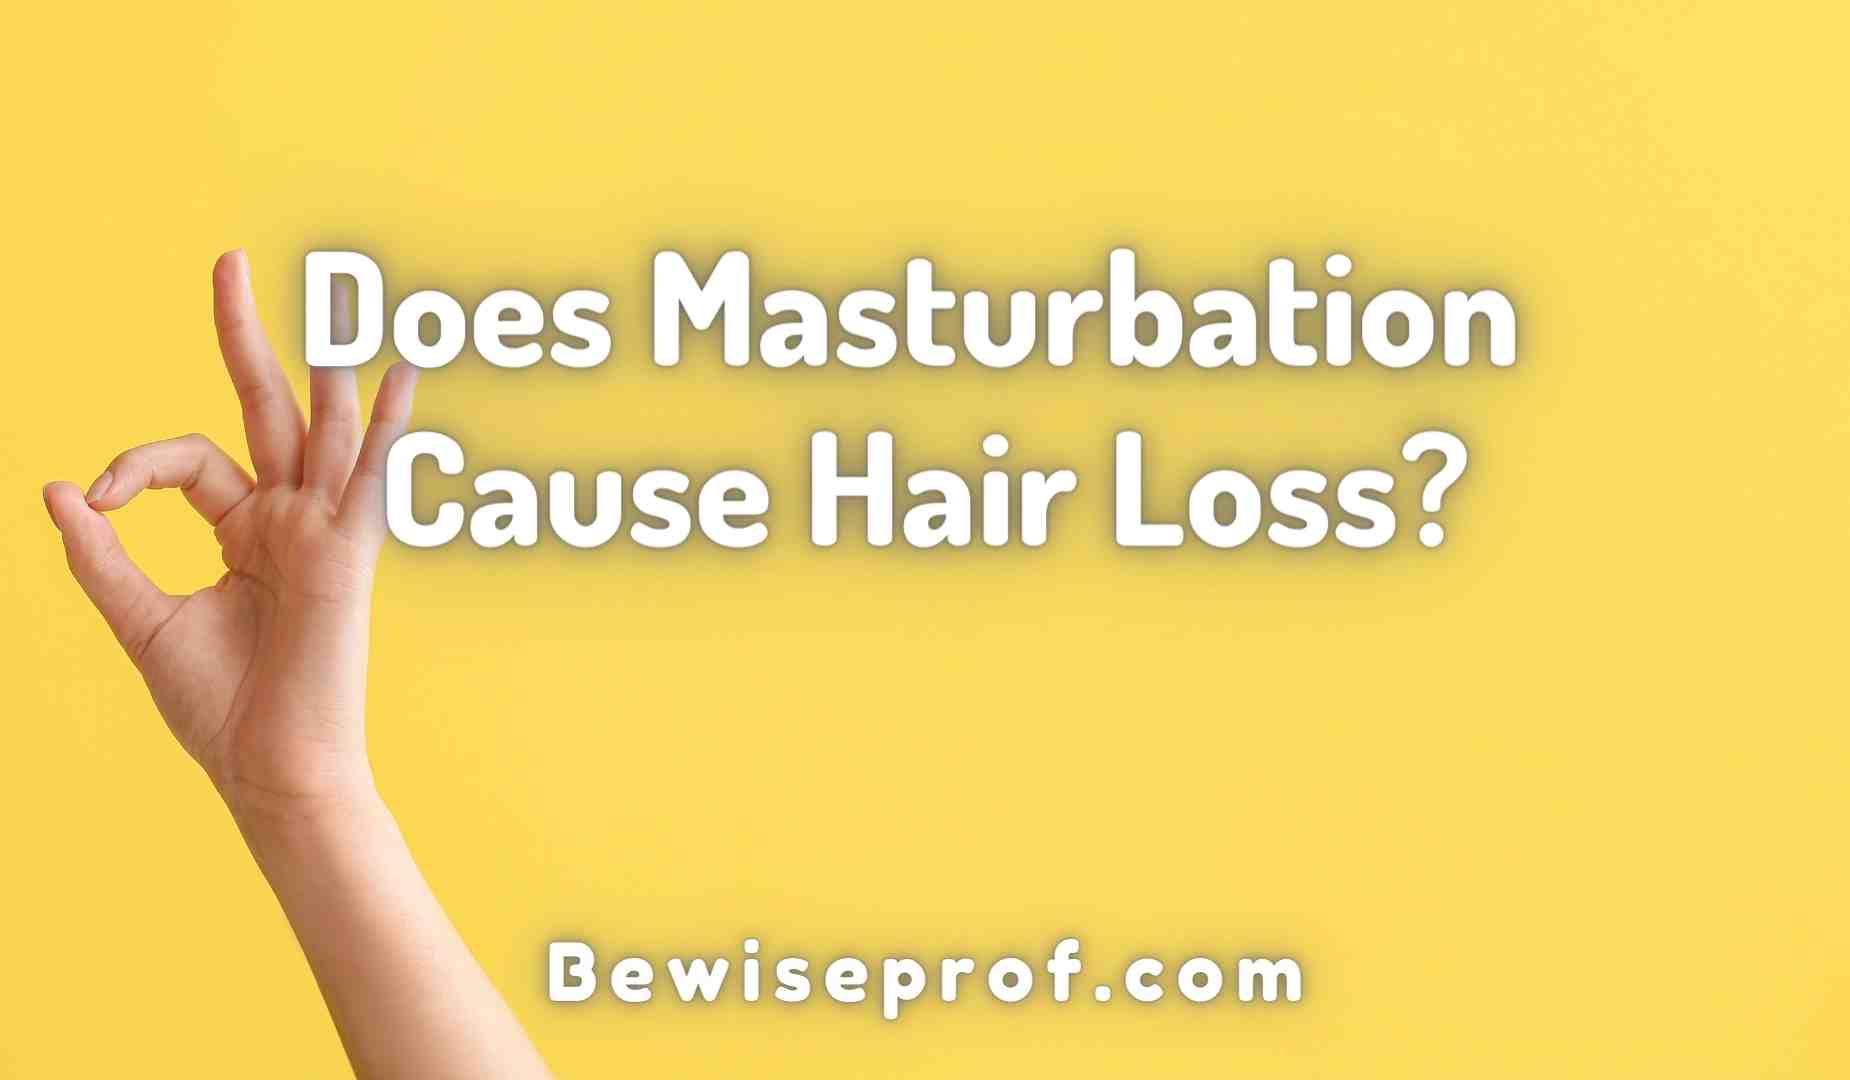 Does Masturbation Result in Hair Loss? And Other Points About It